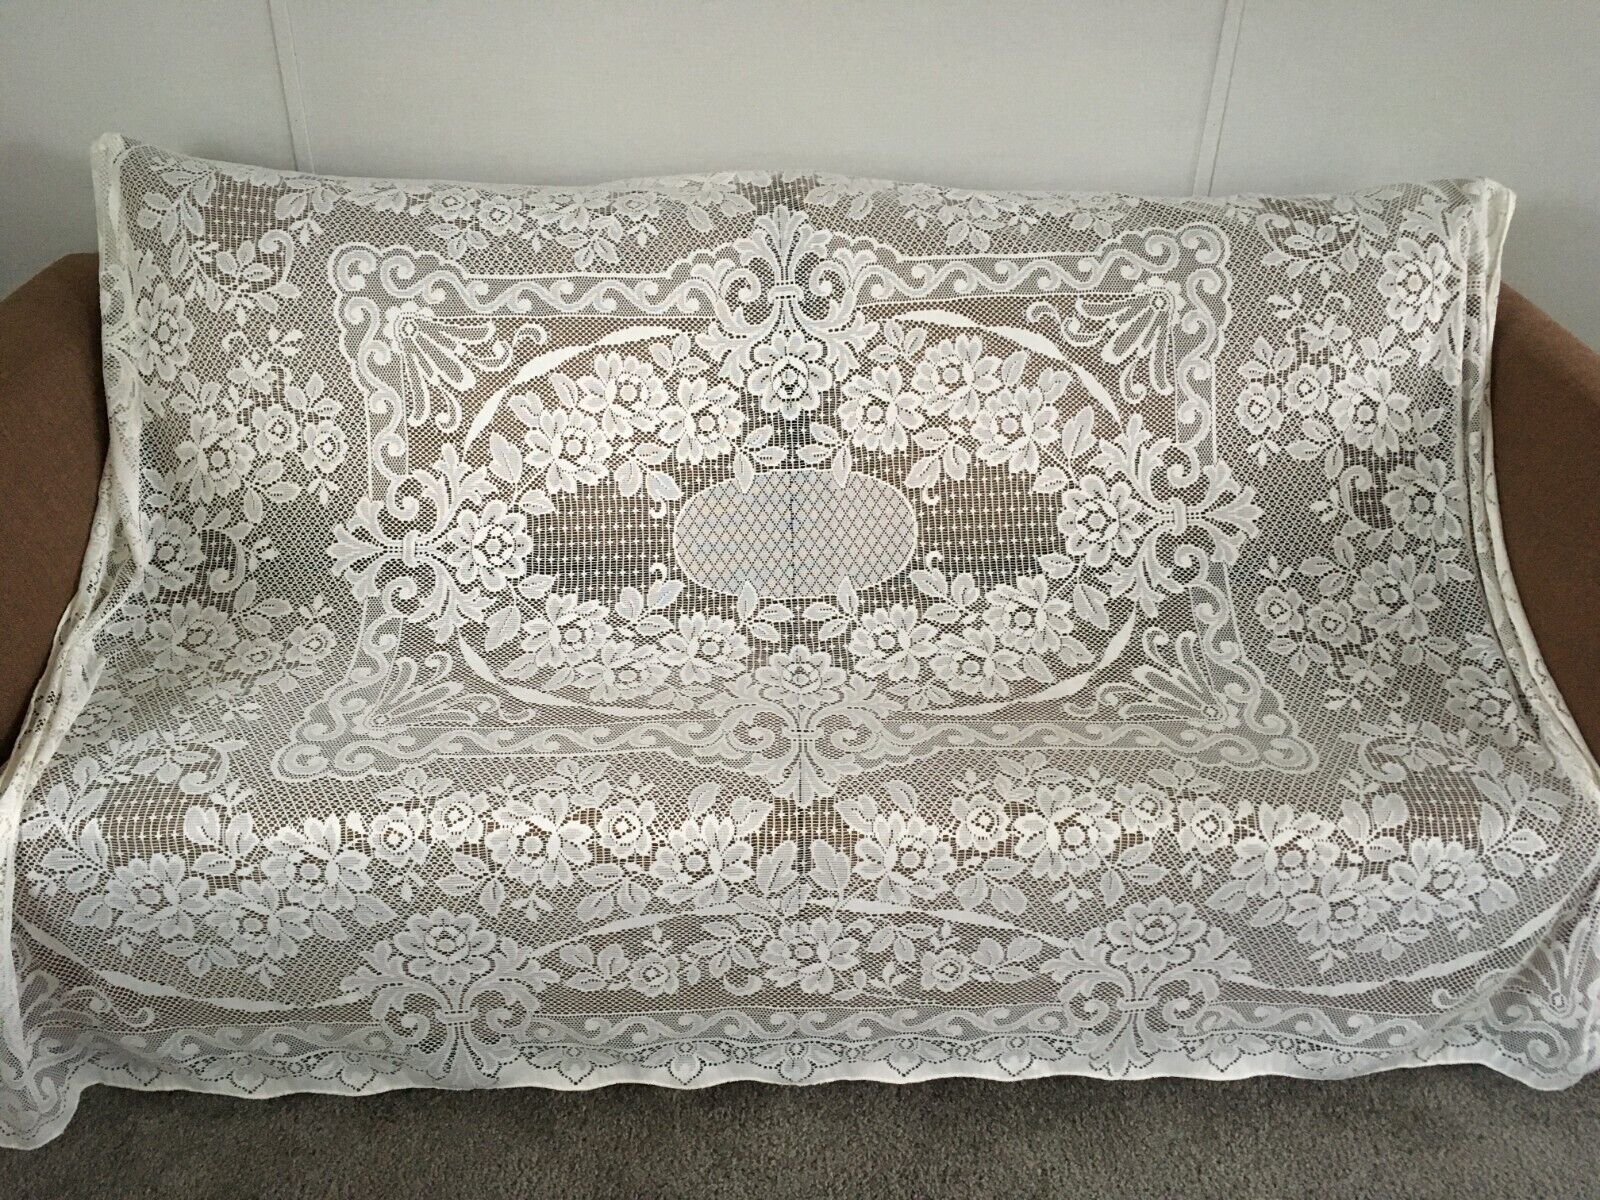 VTG Quaker Lace Floral Damask Flowers Classic Cream Rectangle Tablecloth FLAWS